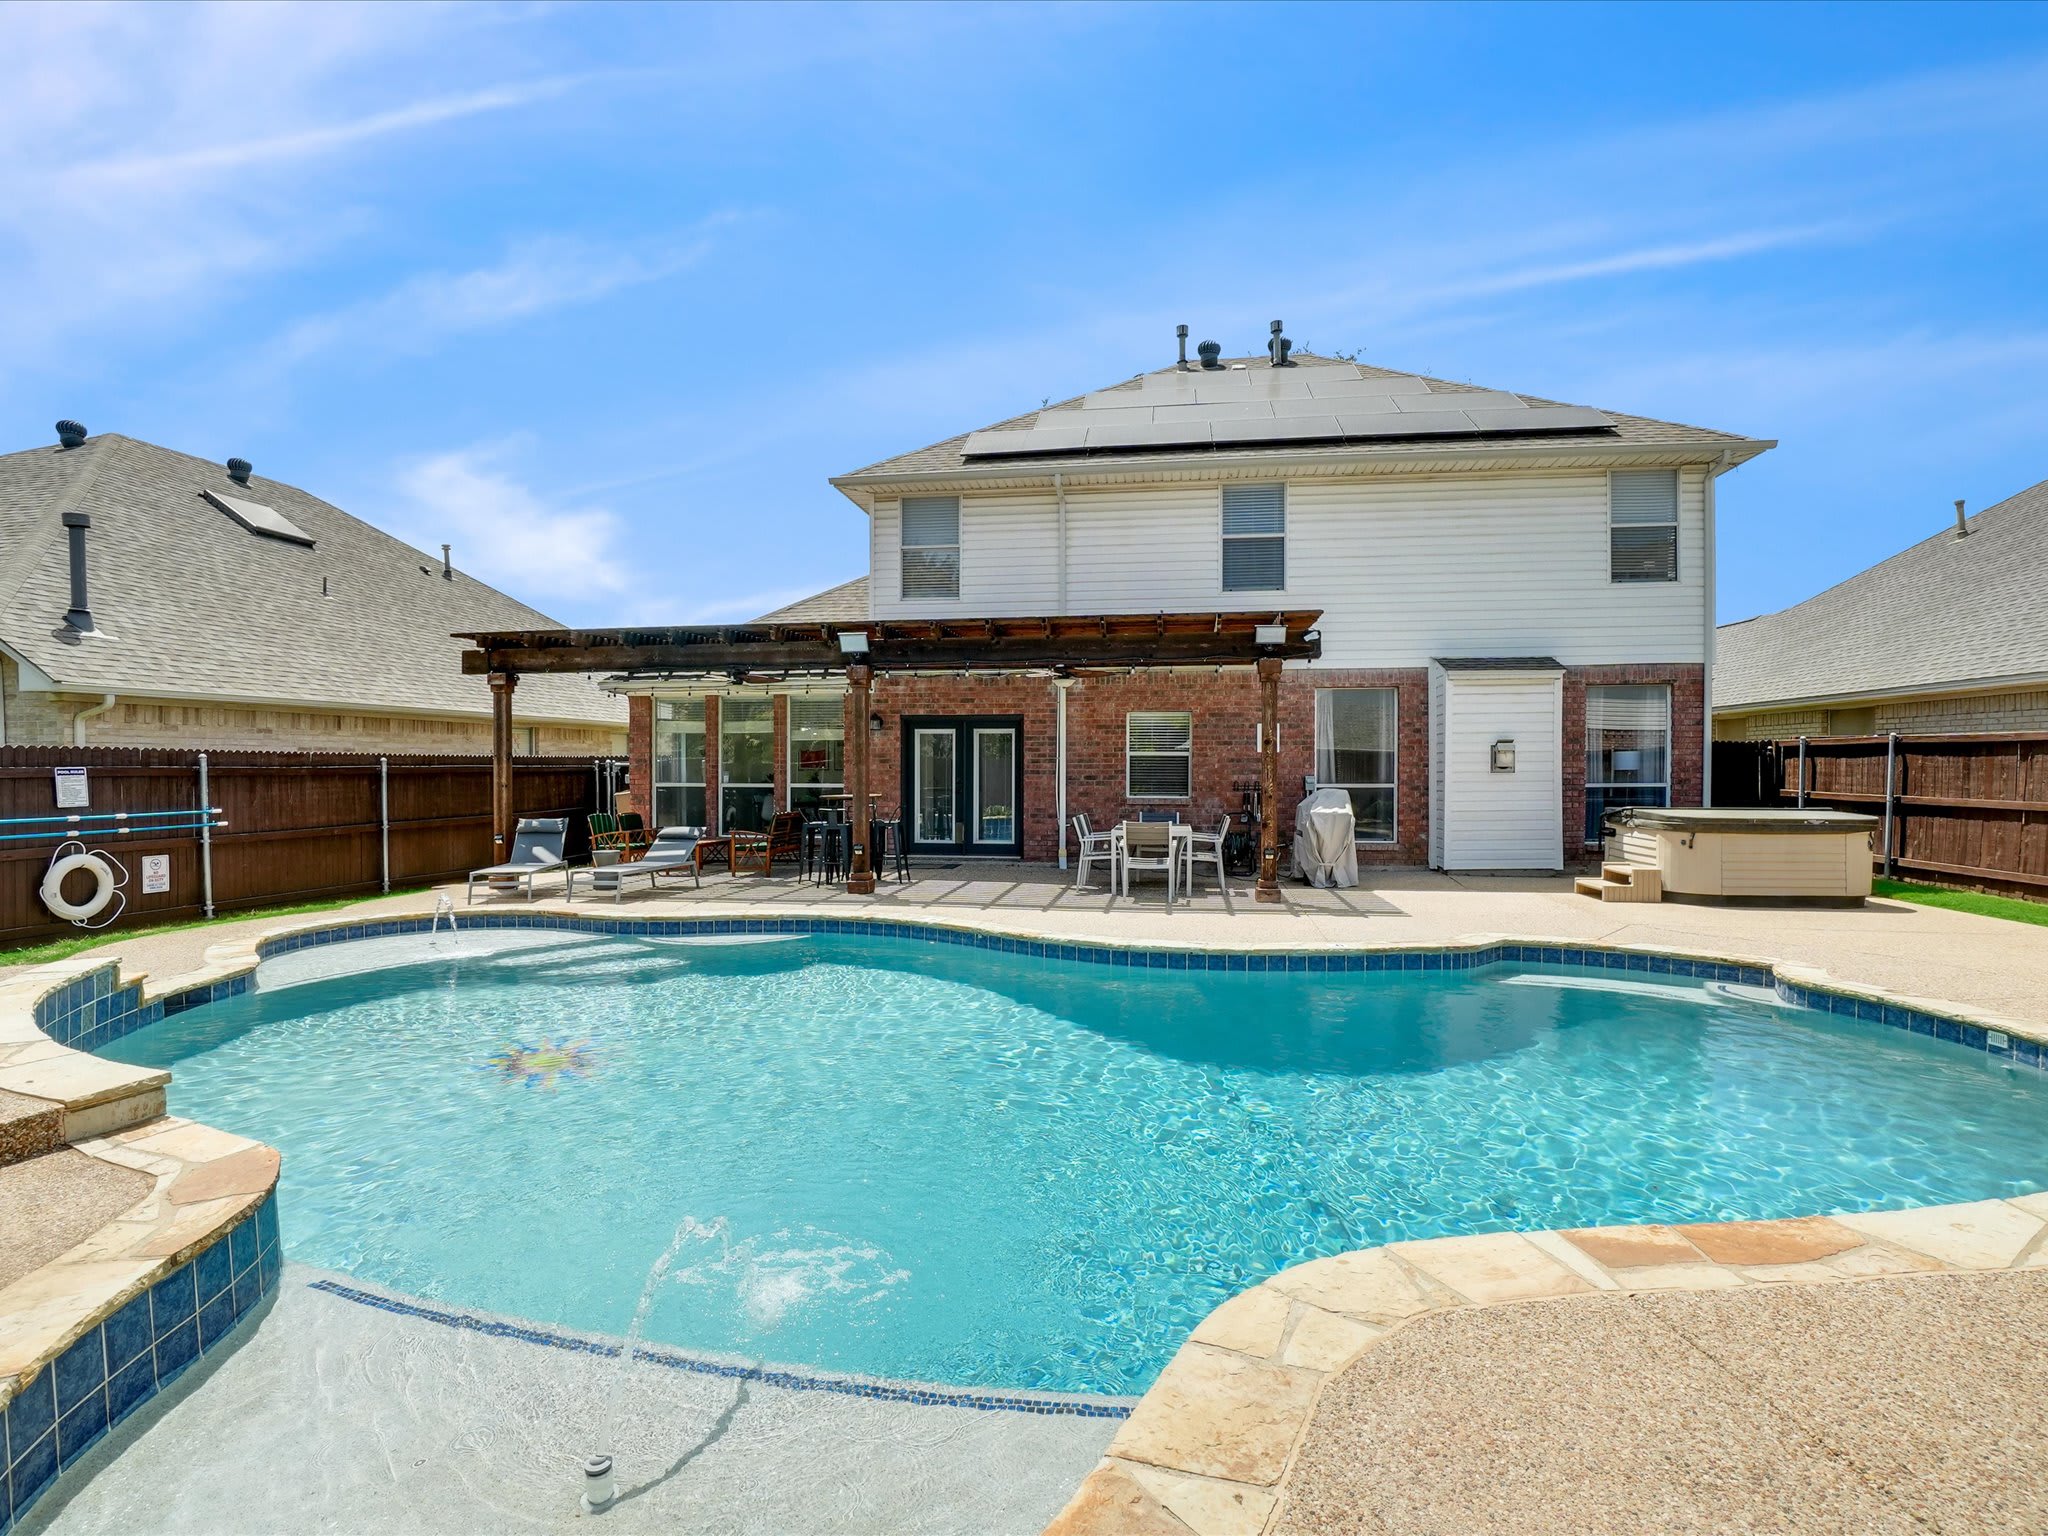 Property Image 1 - The Best of DFW - Pool, Hot Tub, Cinema Room